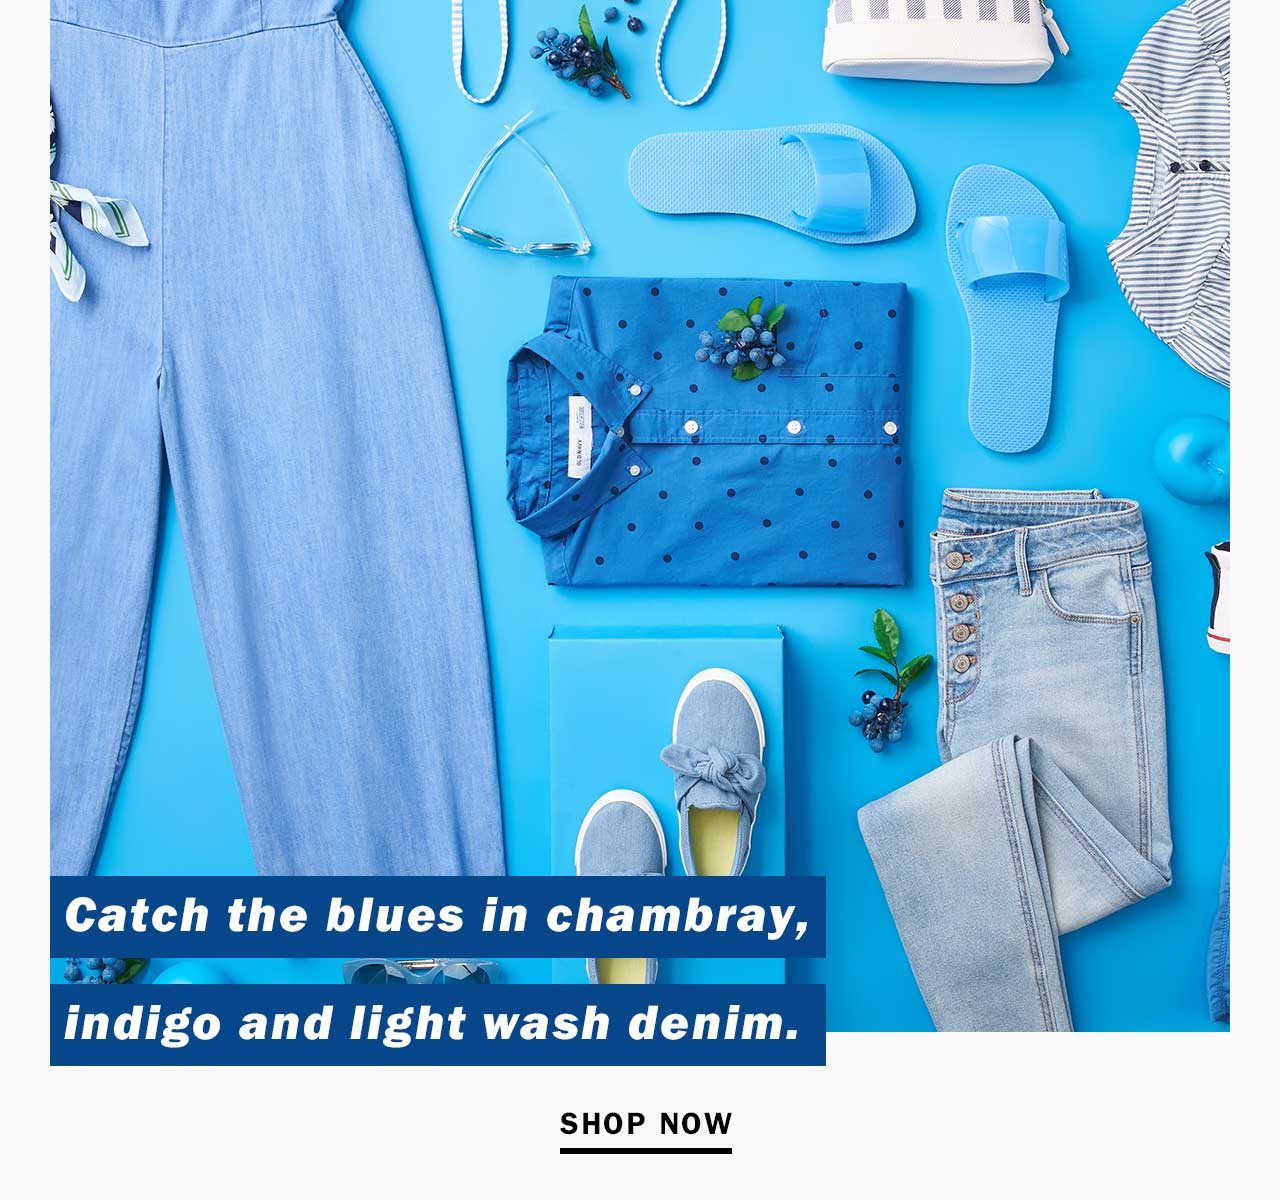 Catch the blues in chambray